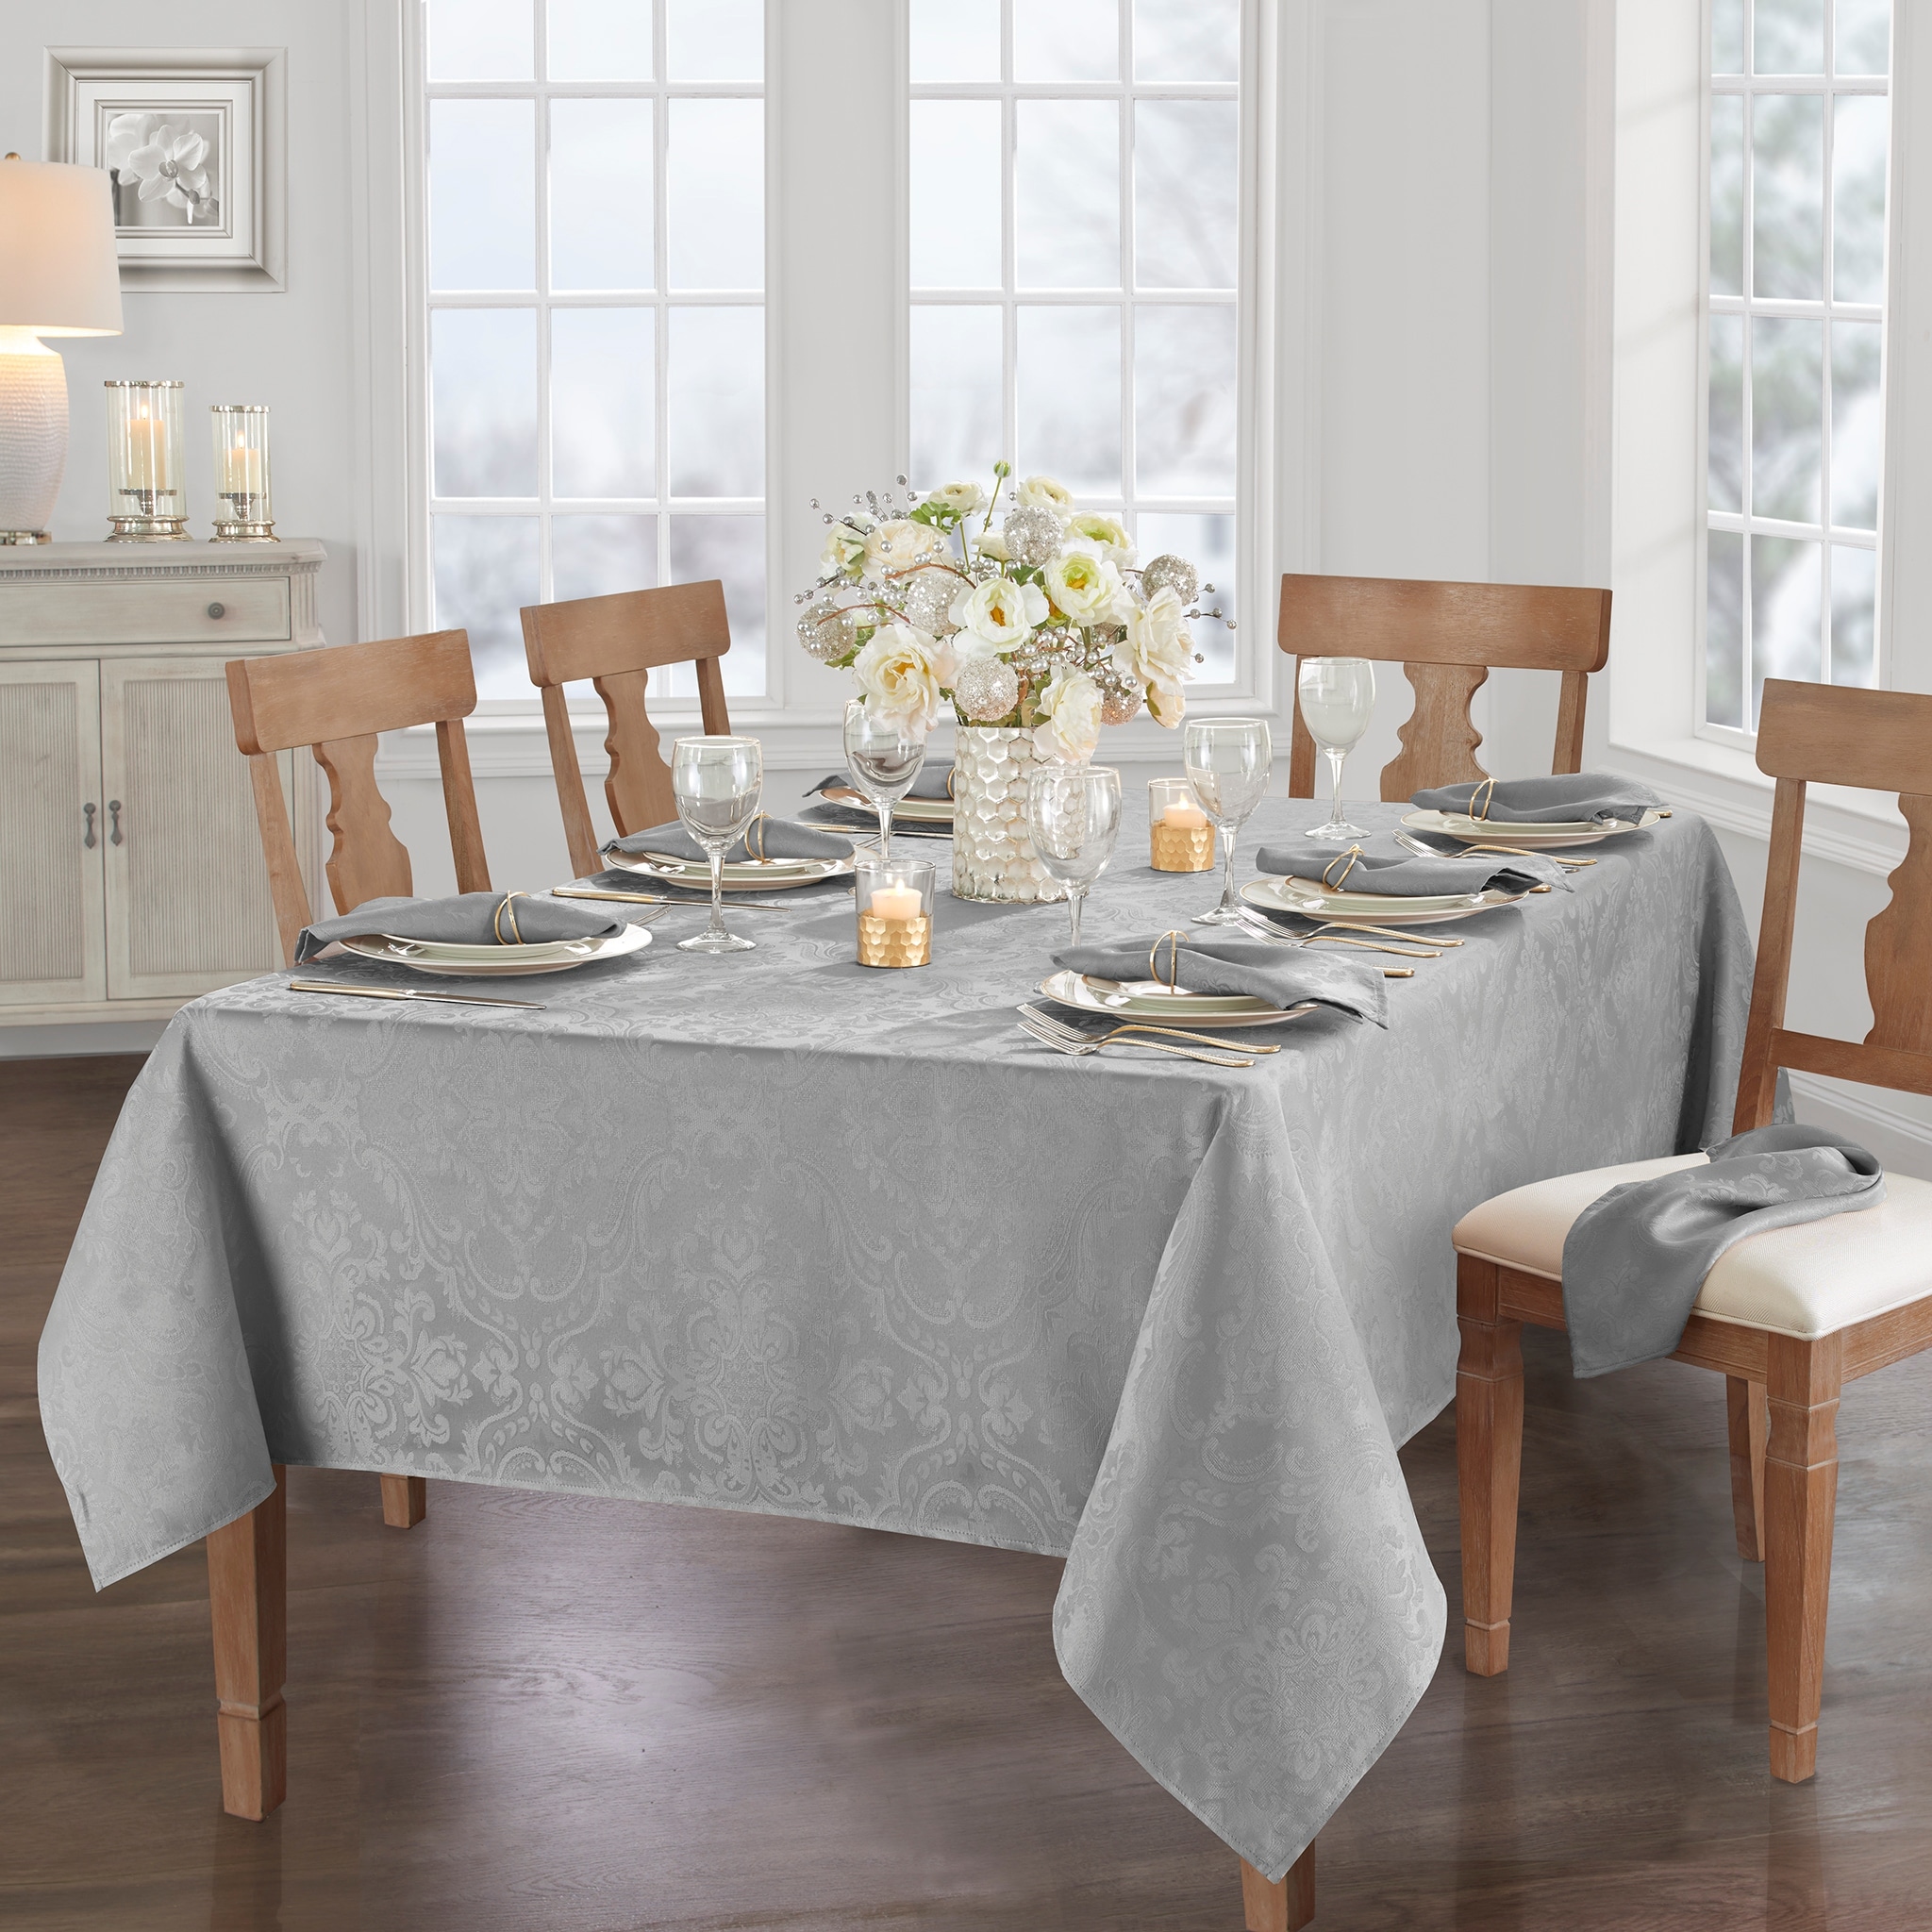 https://ak1.ostkcdn.com/images/products/is/images/direct/672126c7b3b58aac71b9f99e926ea4015db44c7b/Caiden-Elegance-Damask-Tablecloth.jpg